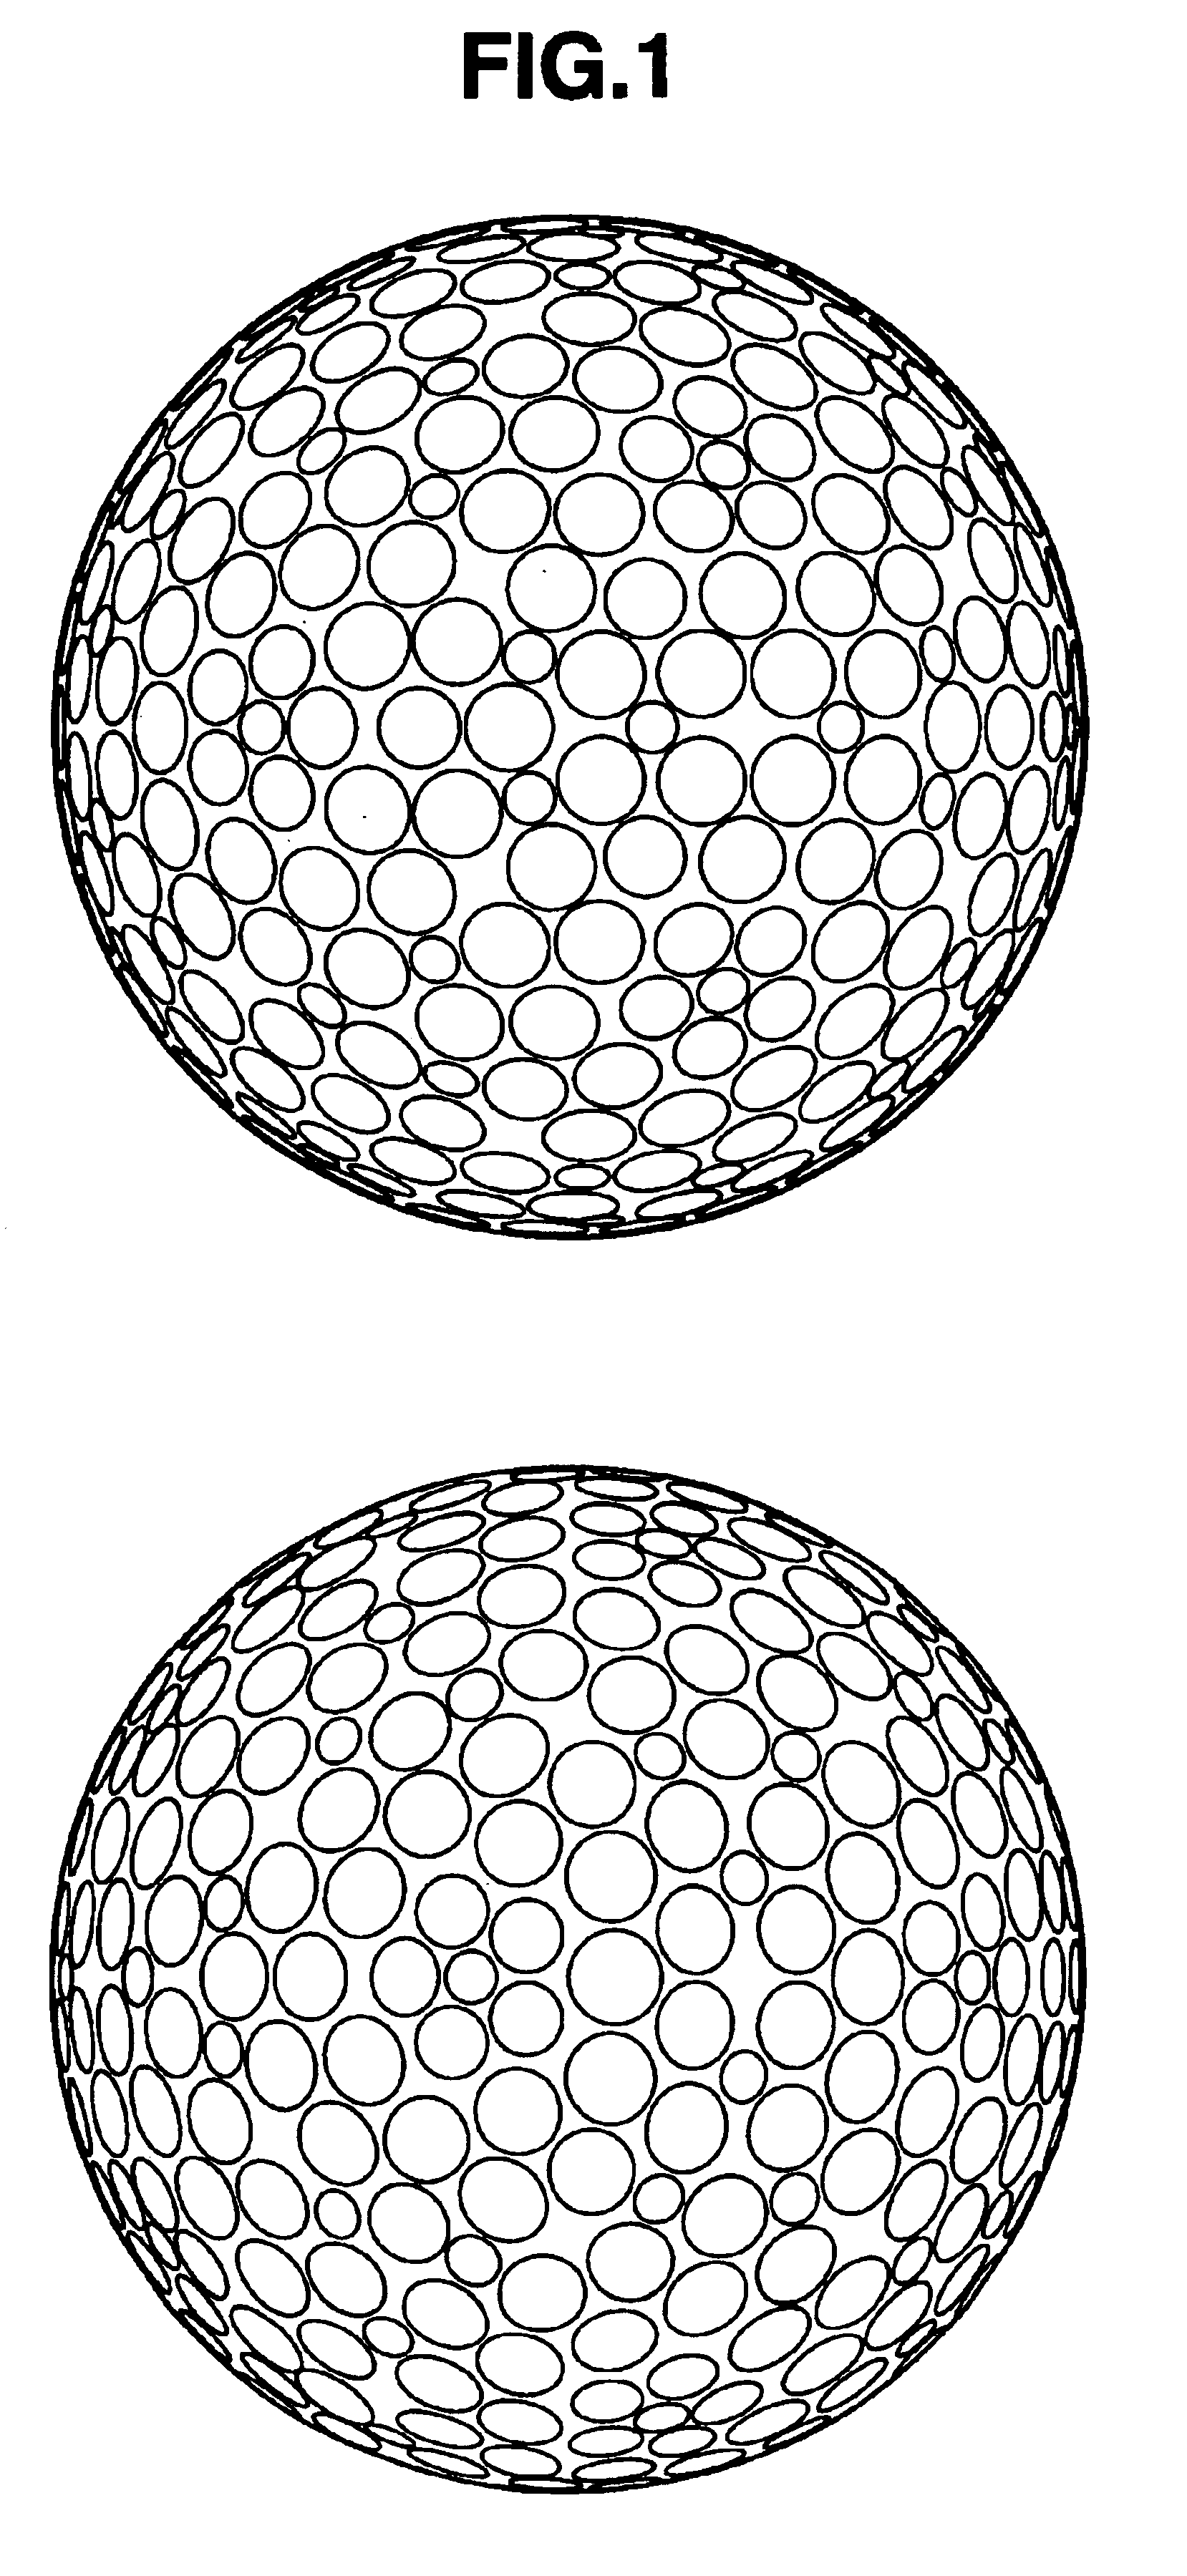 Two-piece solid golf ball